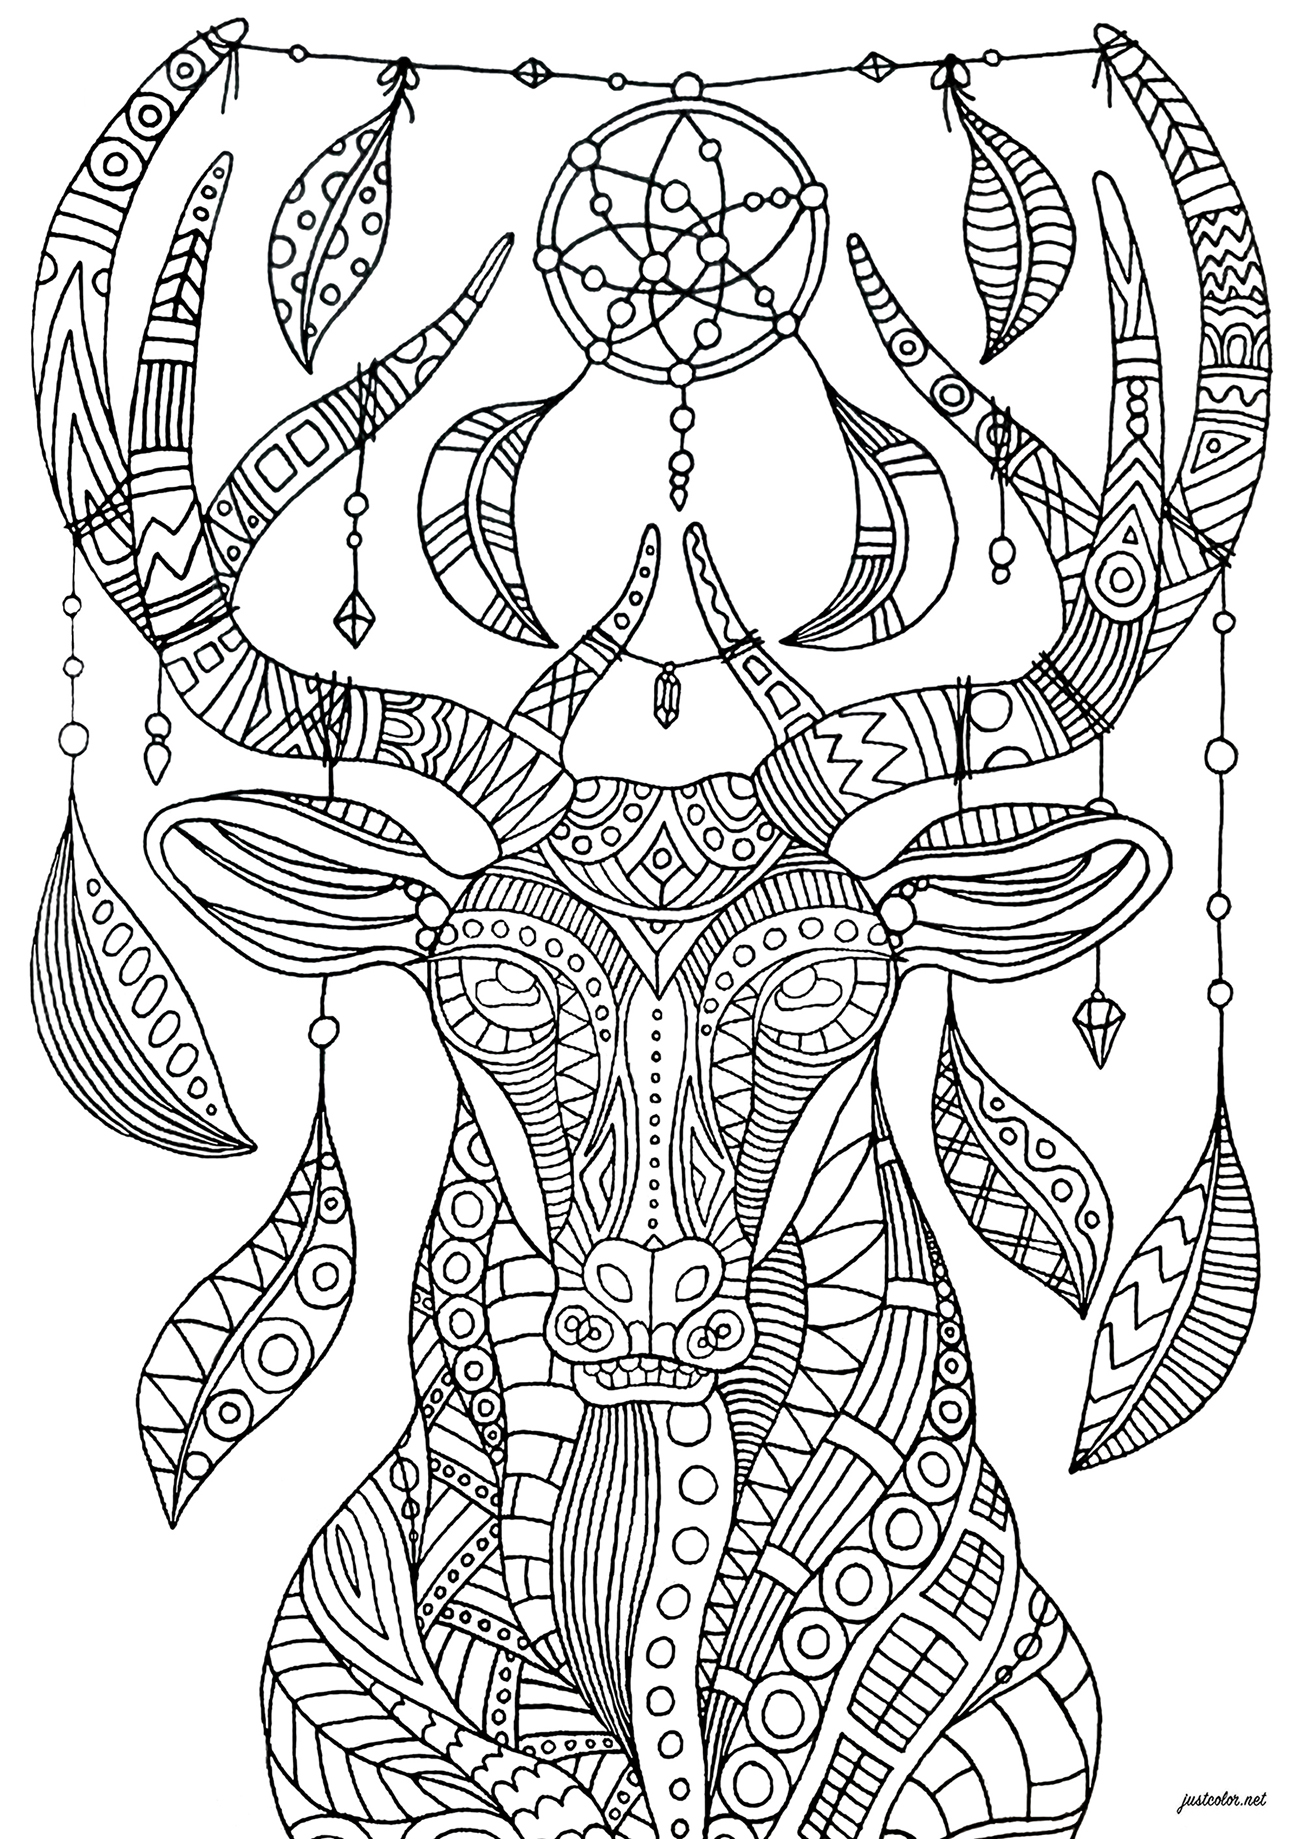 200+ Deer Coloring Pages for Adults: Explore Your Creativity 198